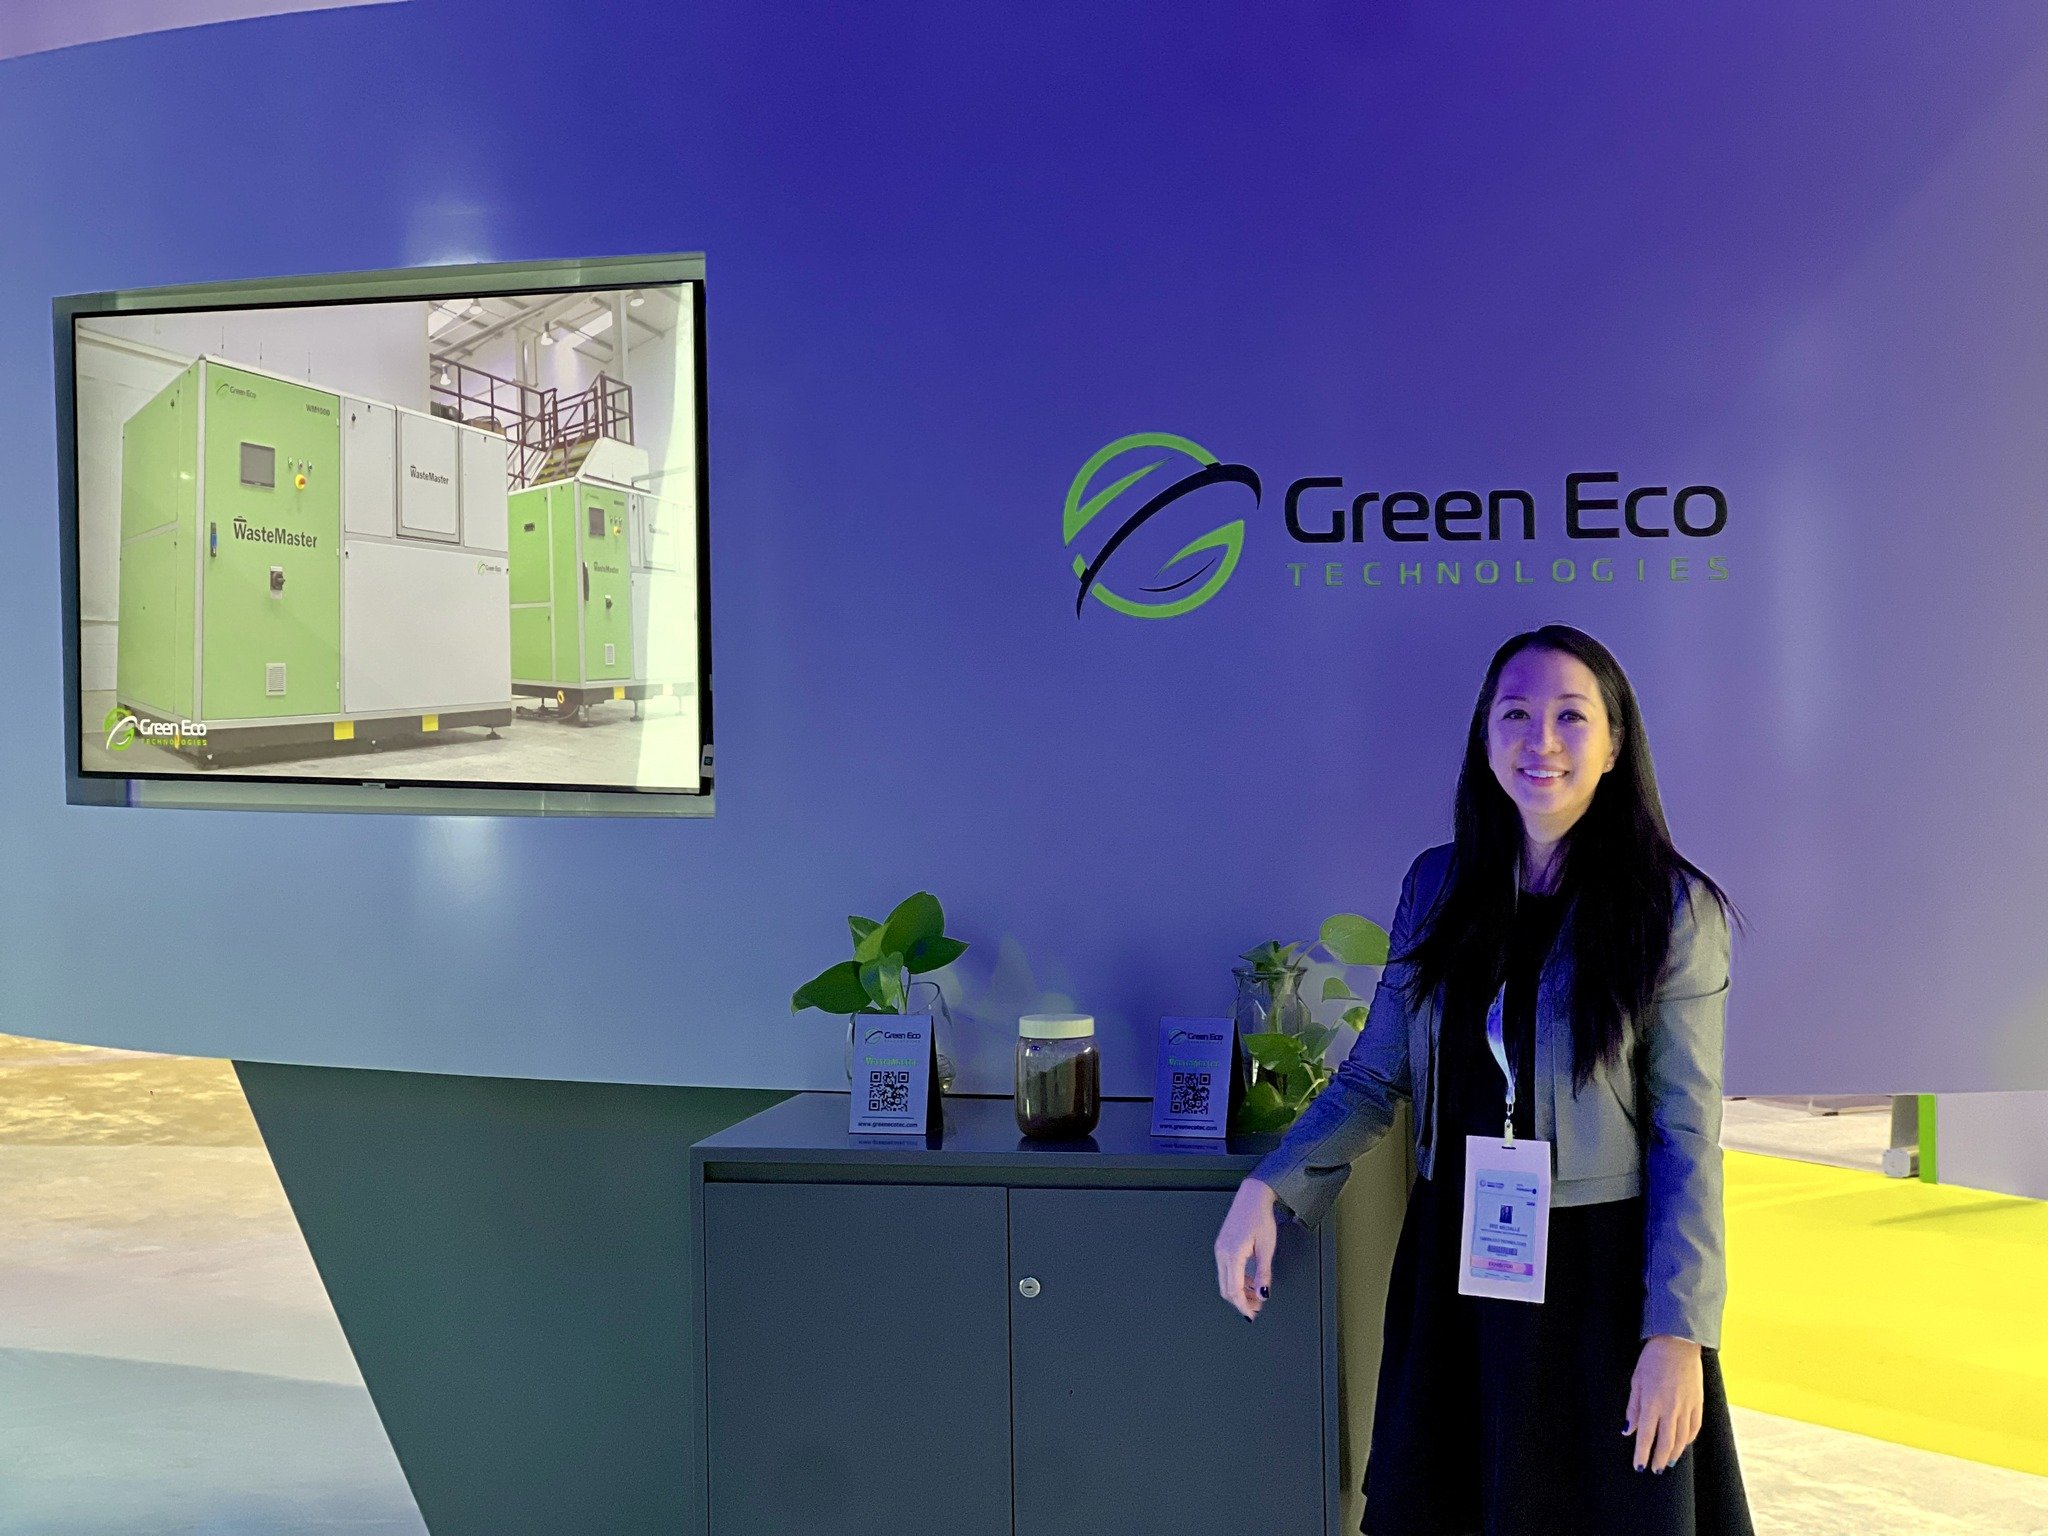 Green Eco Technologies recently attended the World Future Energy Summit in UAE and had the opportunity to exhibit and present our food waste valorisation system WasteMaster to delegates at the event, in partnership with the fantastic team at ne'ma.

